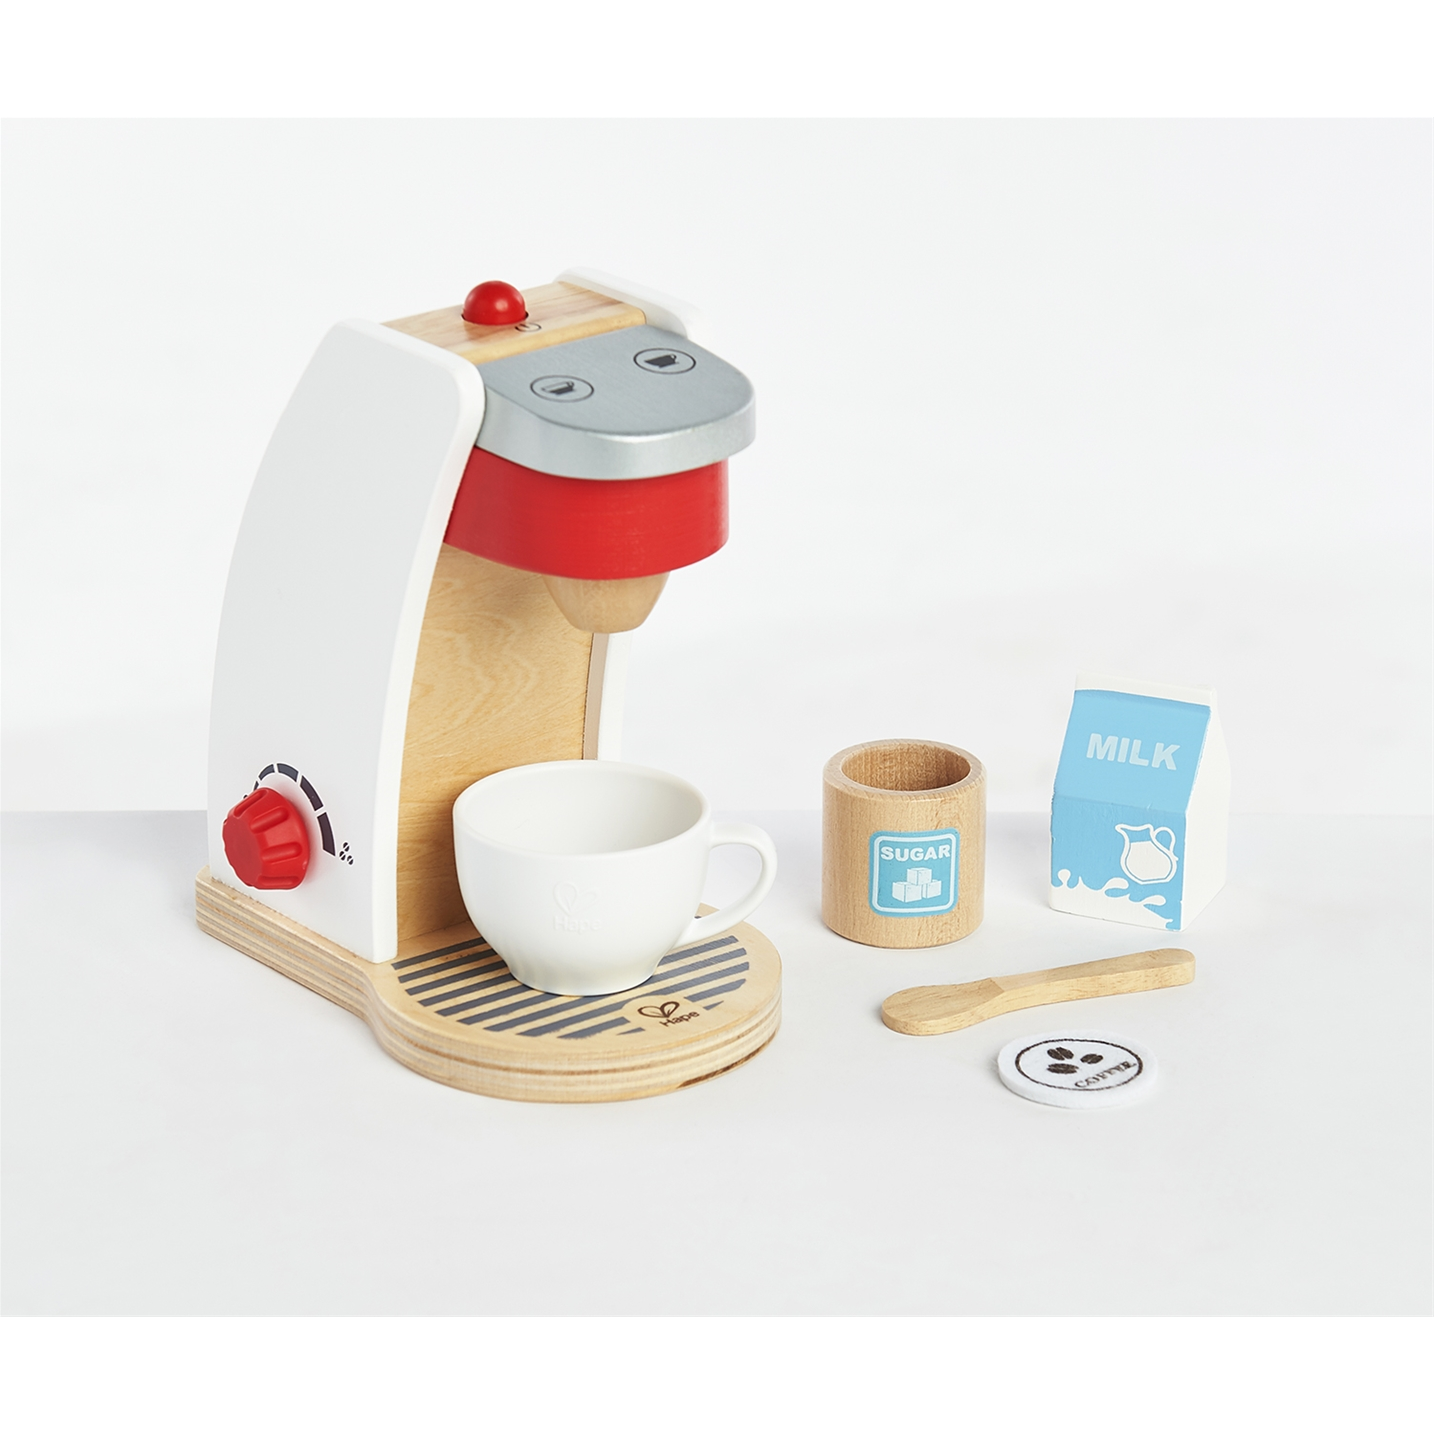 Wood Eats Good Mornings Coffee Maker Playset W Milk & Sugar 10pcs Toy for sale online 